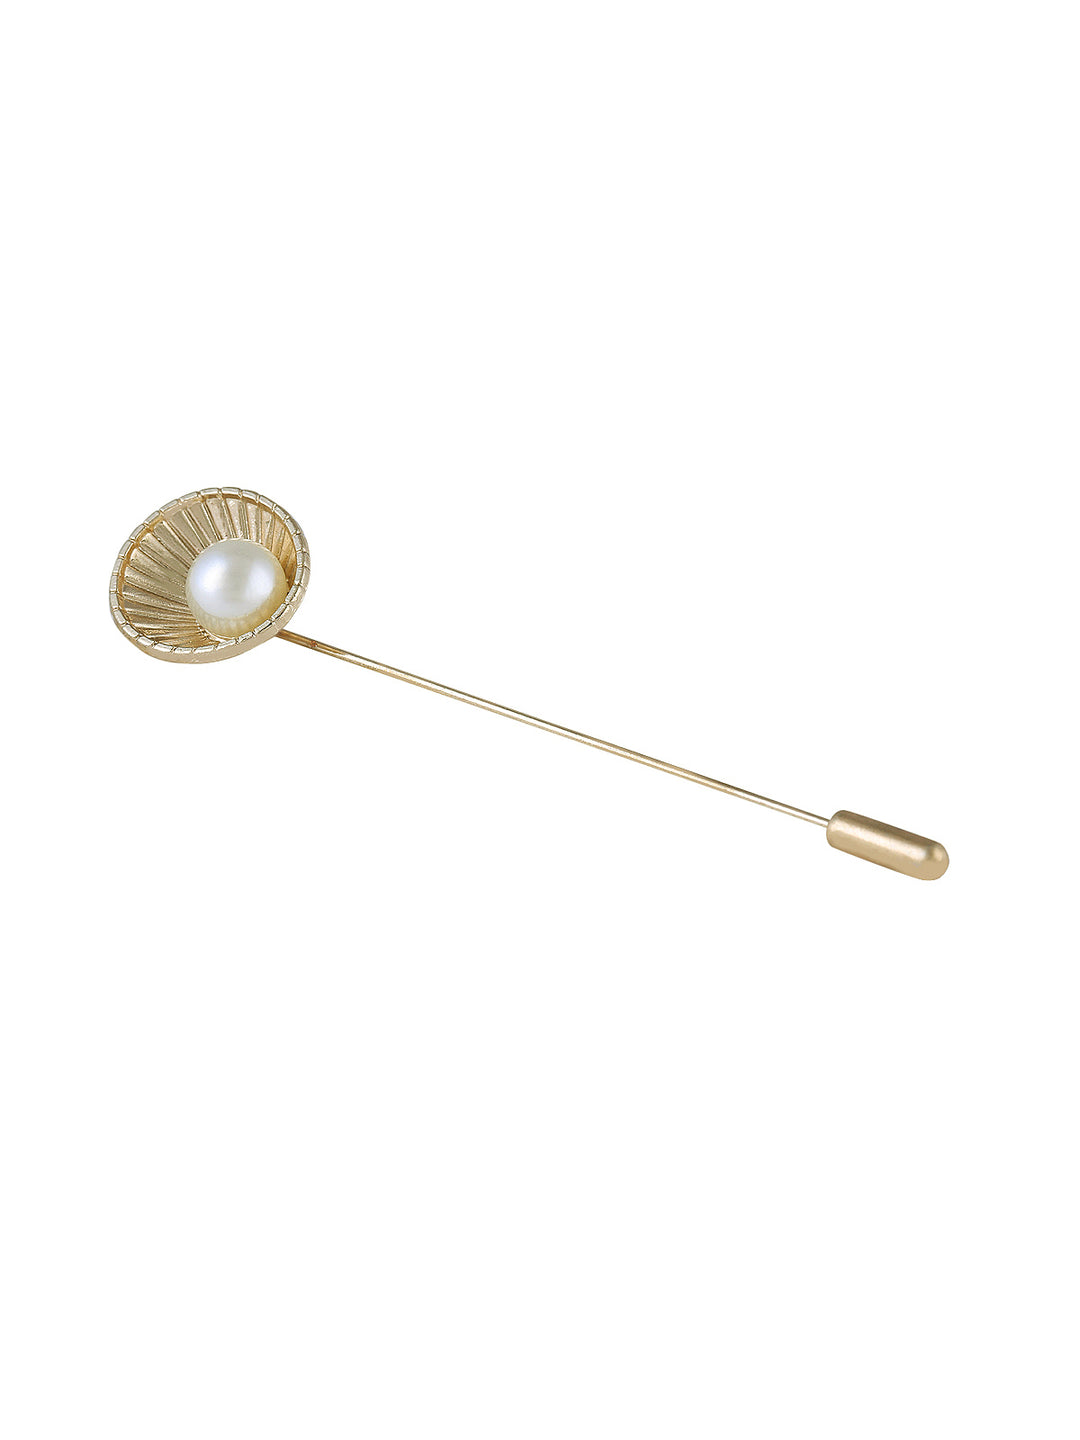 Beautiful Hollow Shell-Like Design with Pearl Lapel Pin